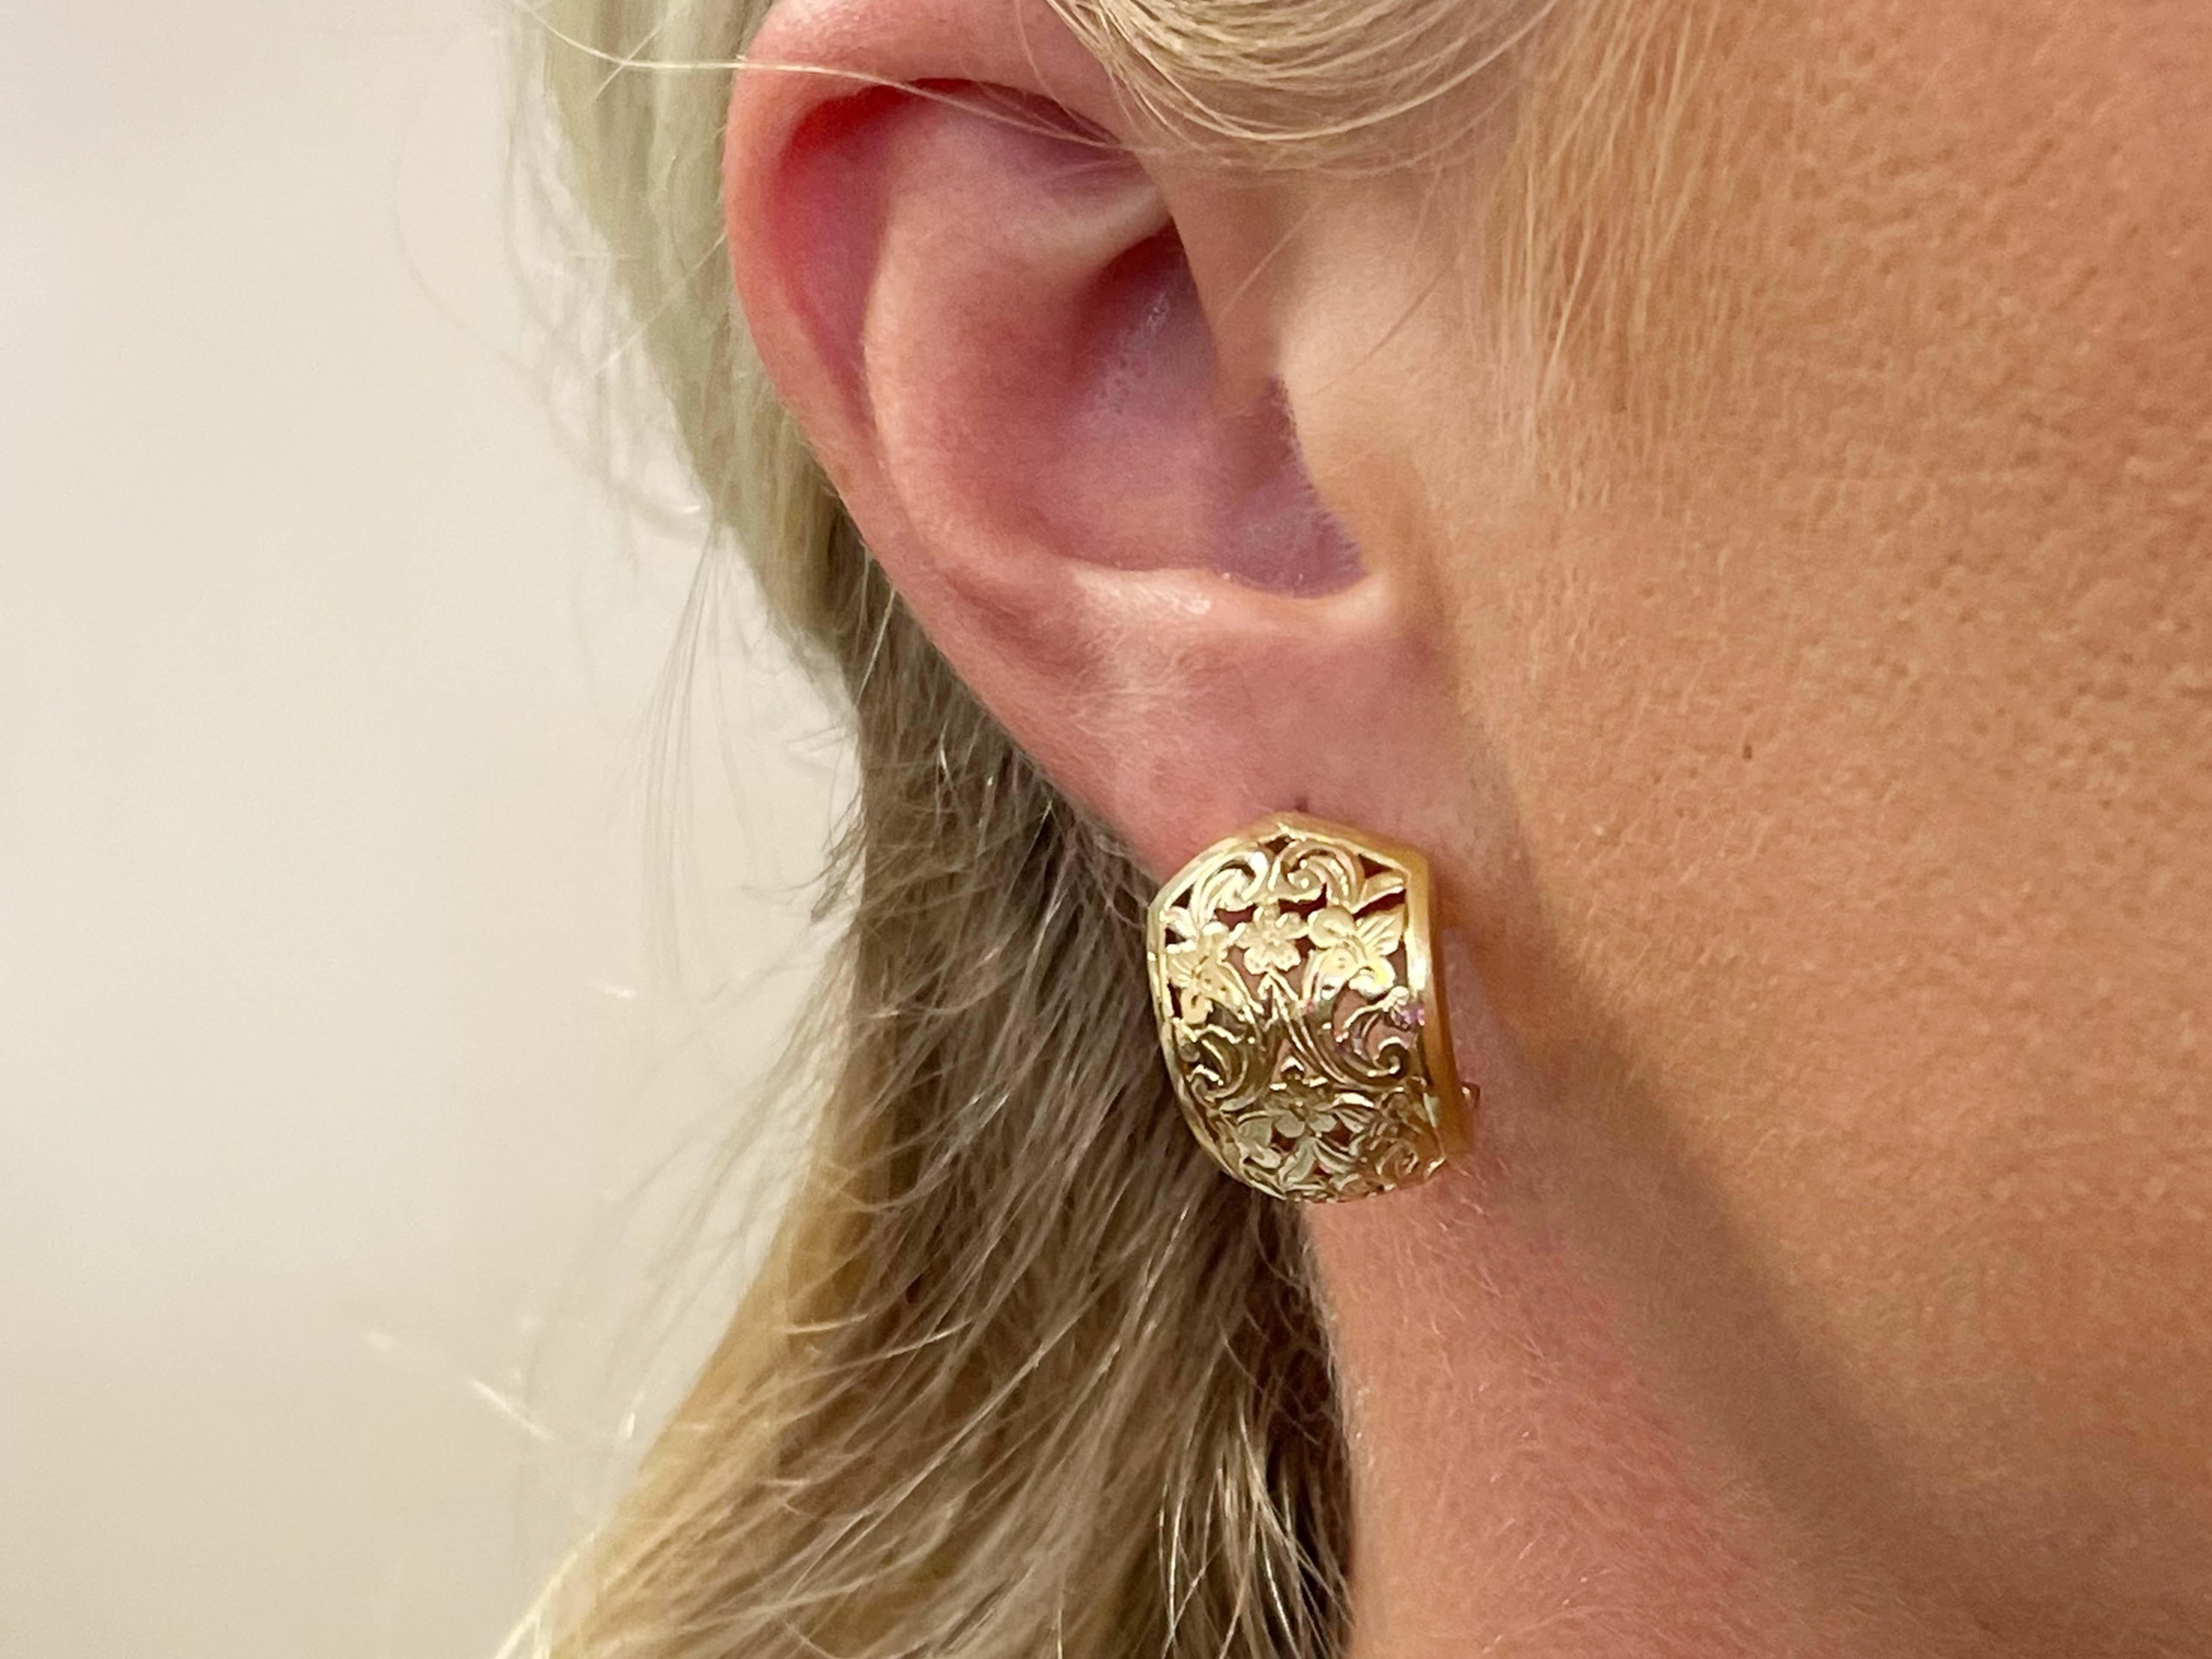 Earrings Specifications:

Designer: Ming's

Metal: 14K Yellow Gold

Total Weight: 8.3 Grams

Earring Measurements: 15.5 mm x 20 mm

Stamped: 